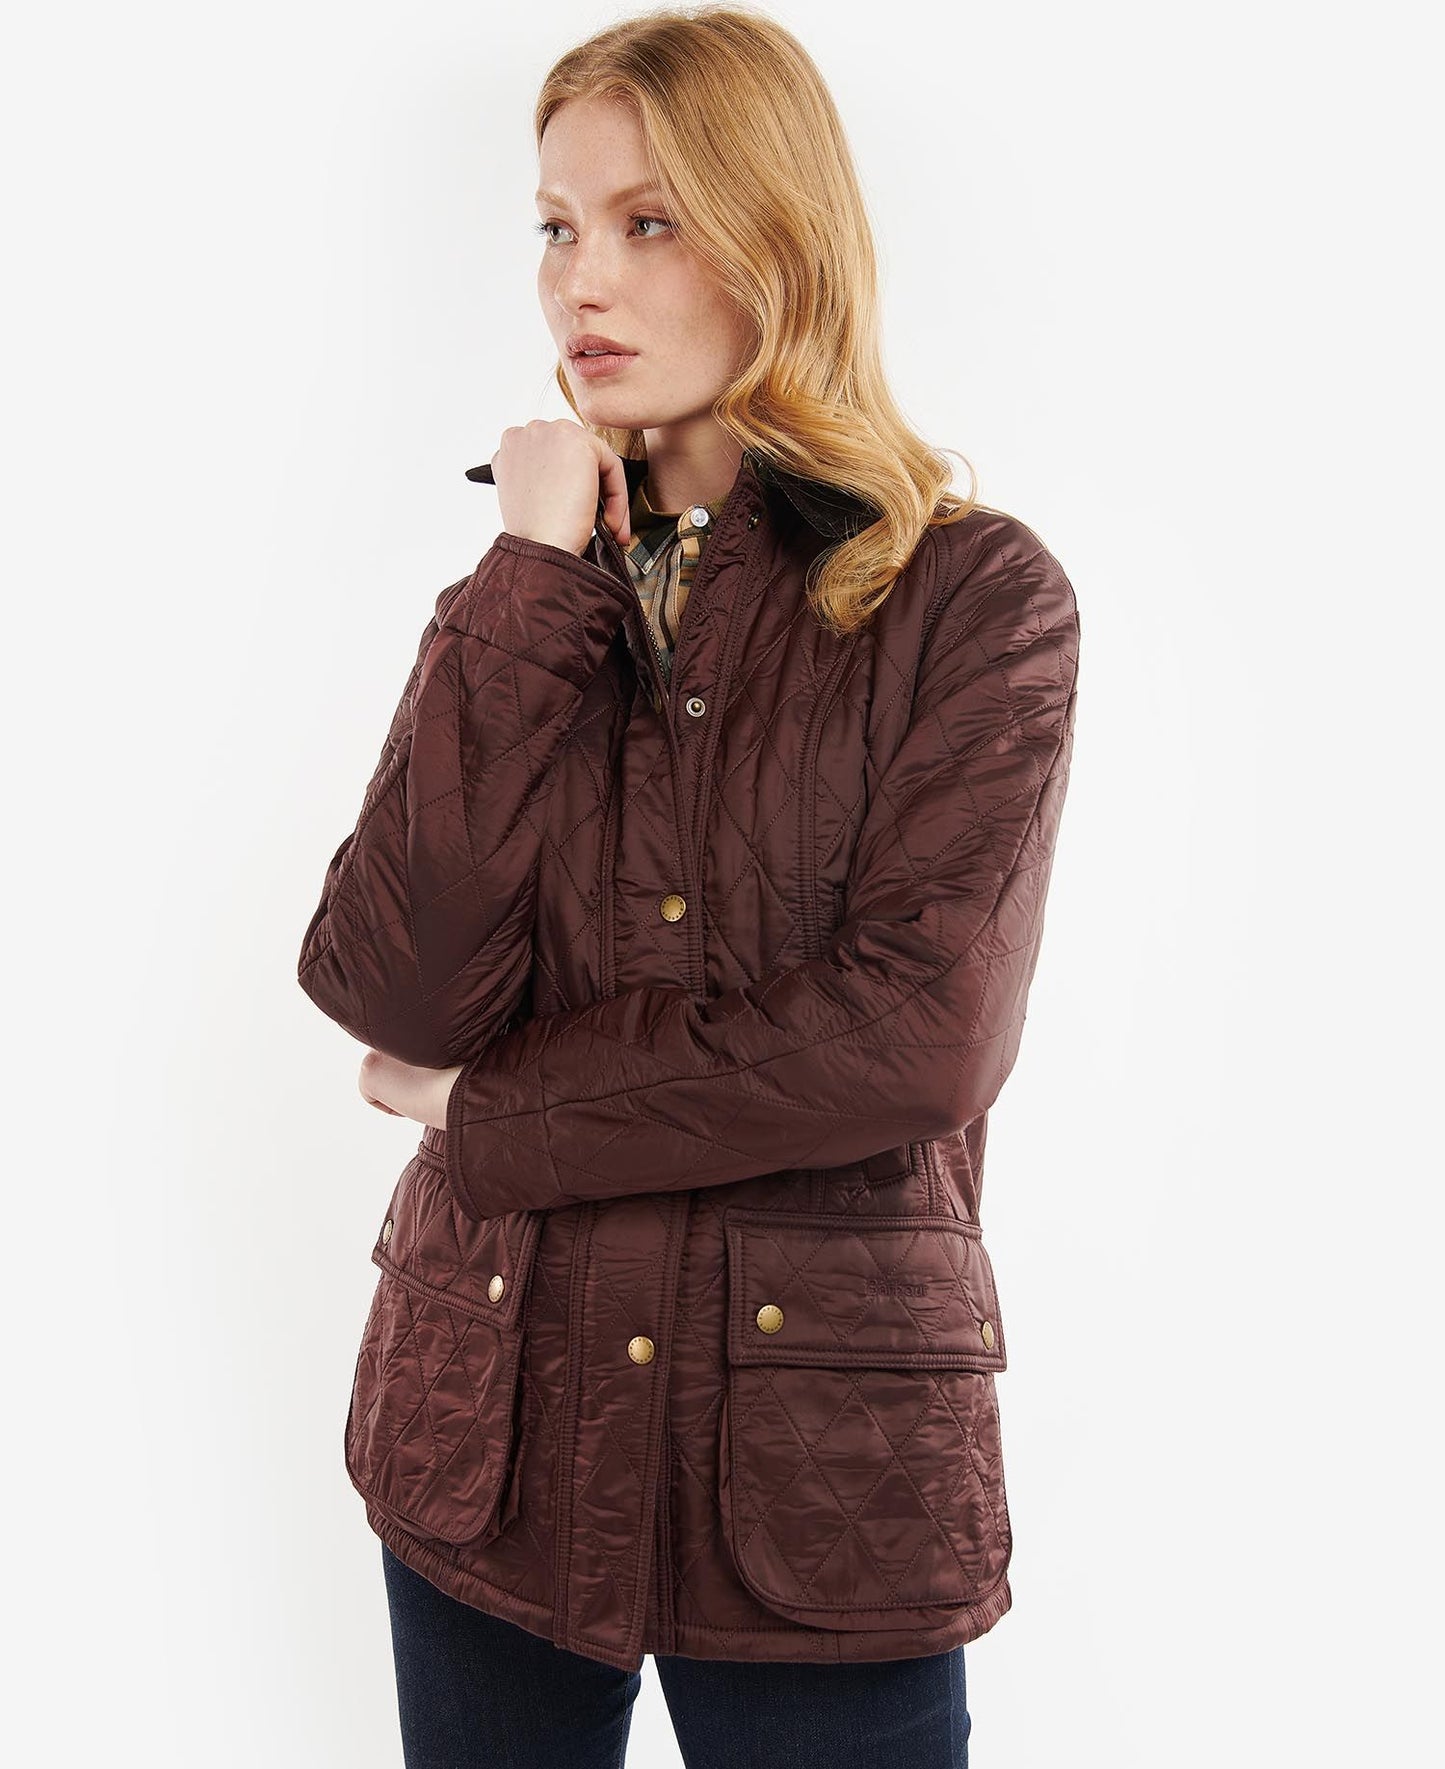 Women's Barbour Beadnell Polarquilt Quilted Jacket (2 Colors)